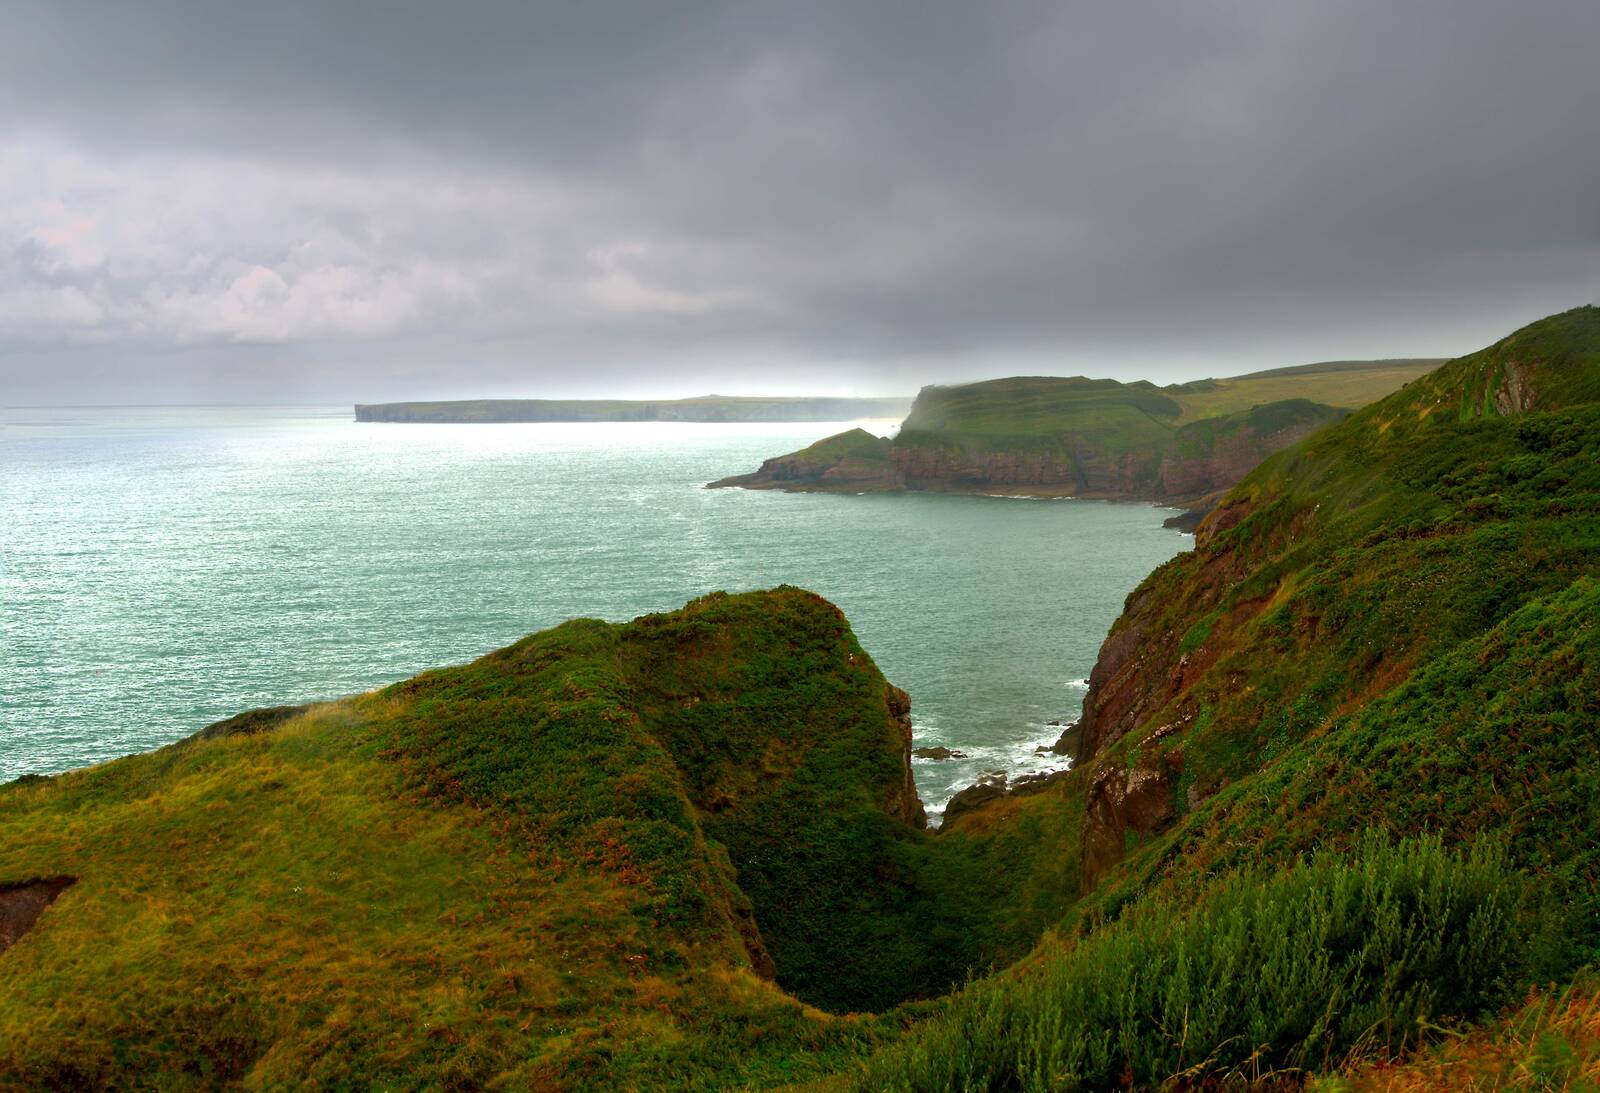 Image of Freshwater East by Philip Eptlett